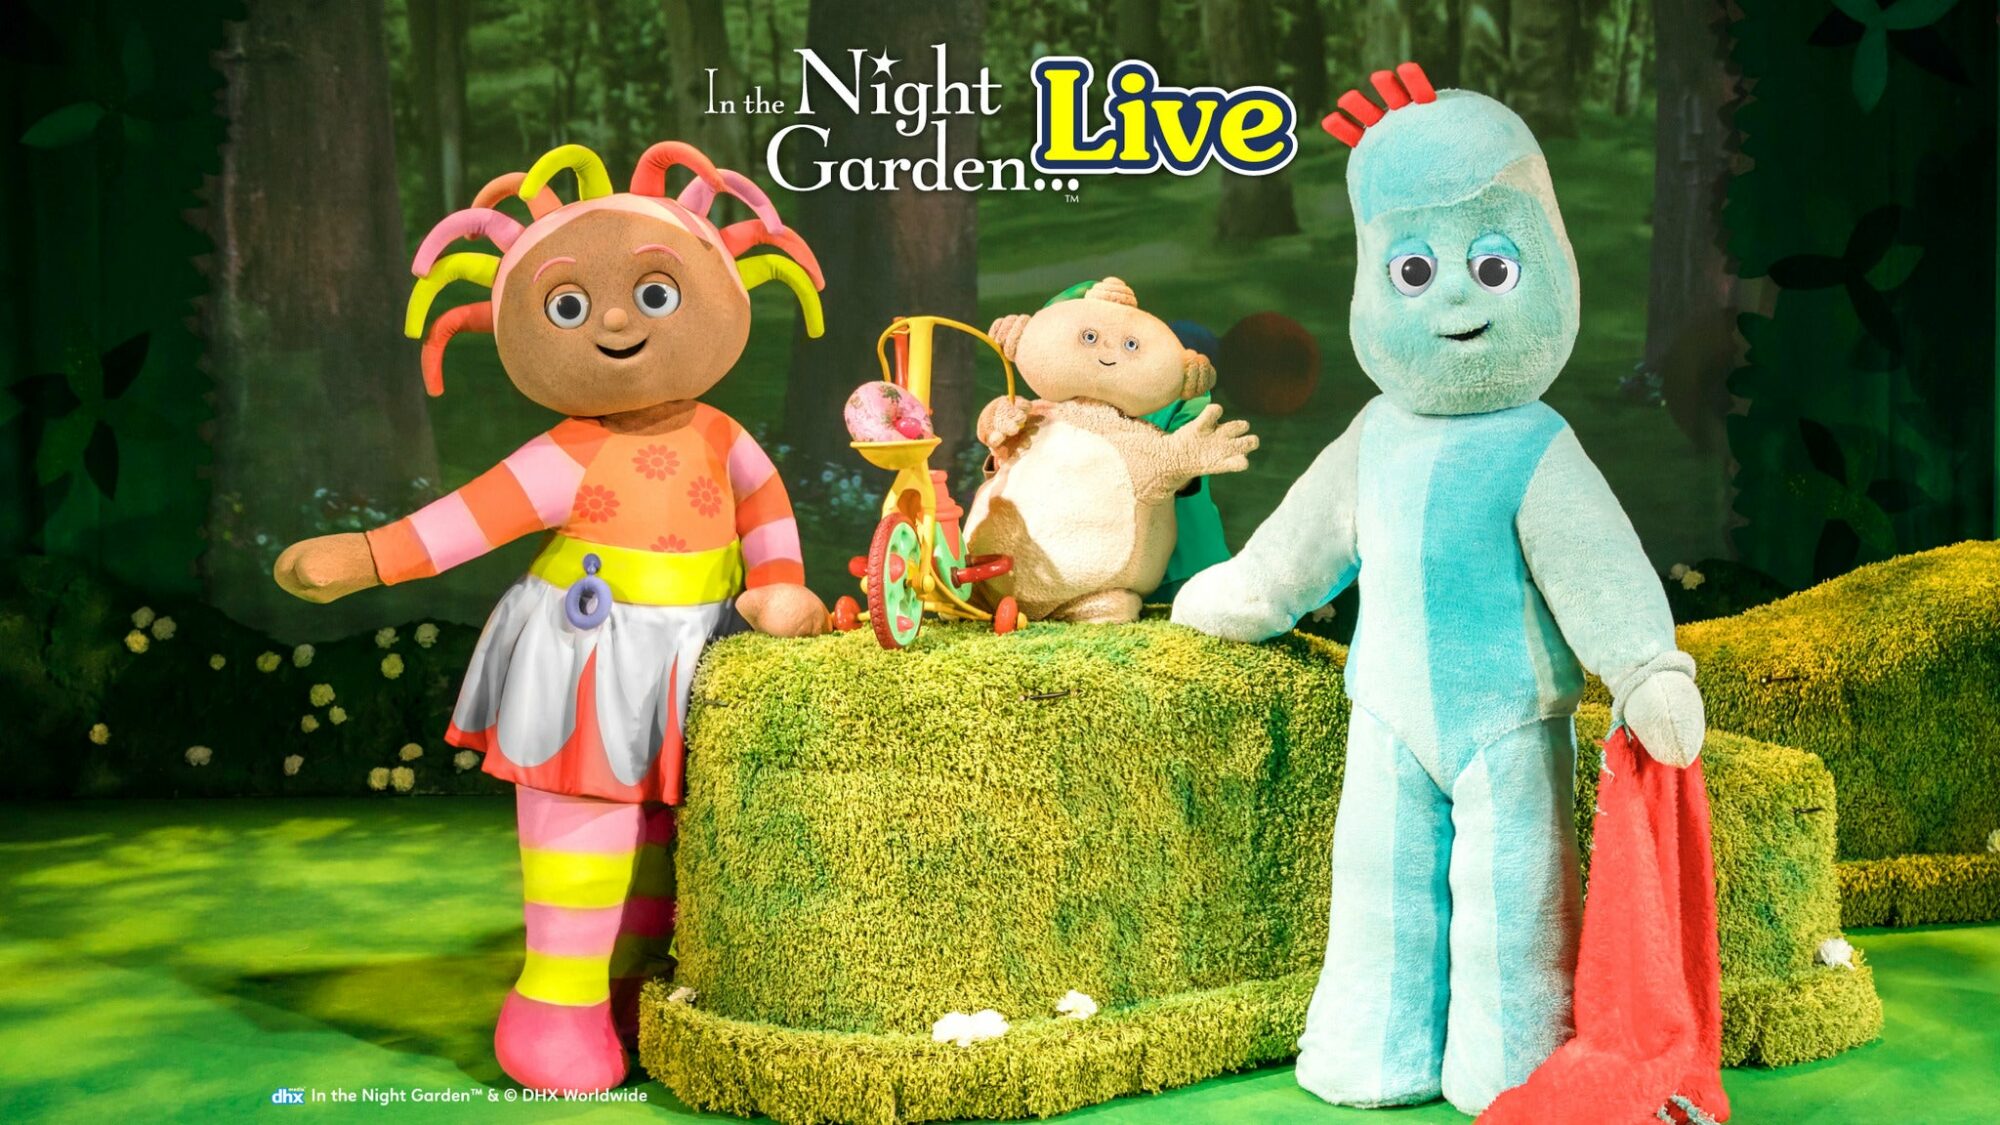 Image name In the Night Garden Live at Scarborough Spa Grand Hall Scarborough the 2 image from the post In the Night Garden Live at Scarborough Spa Grand Hall, Scarborough in Yorkshire.com.